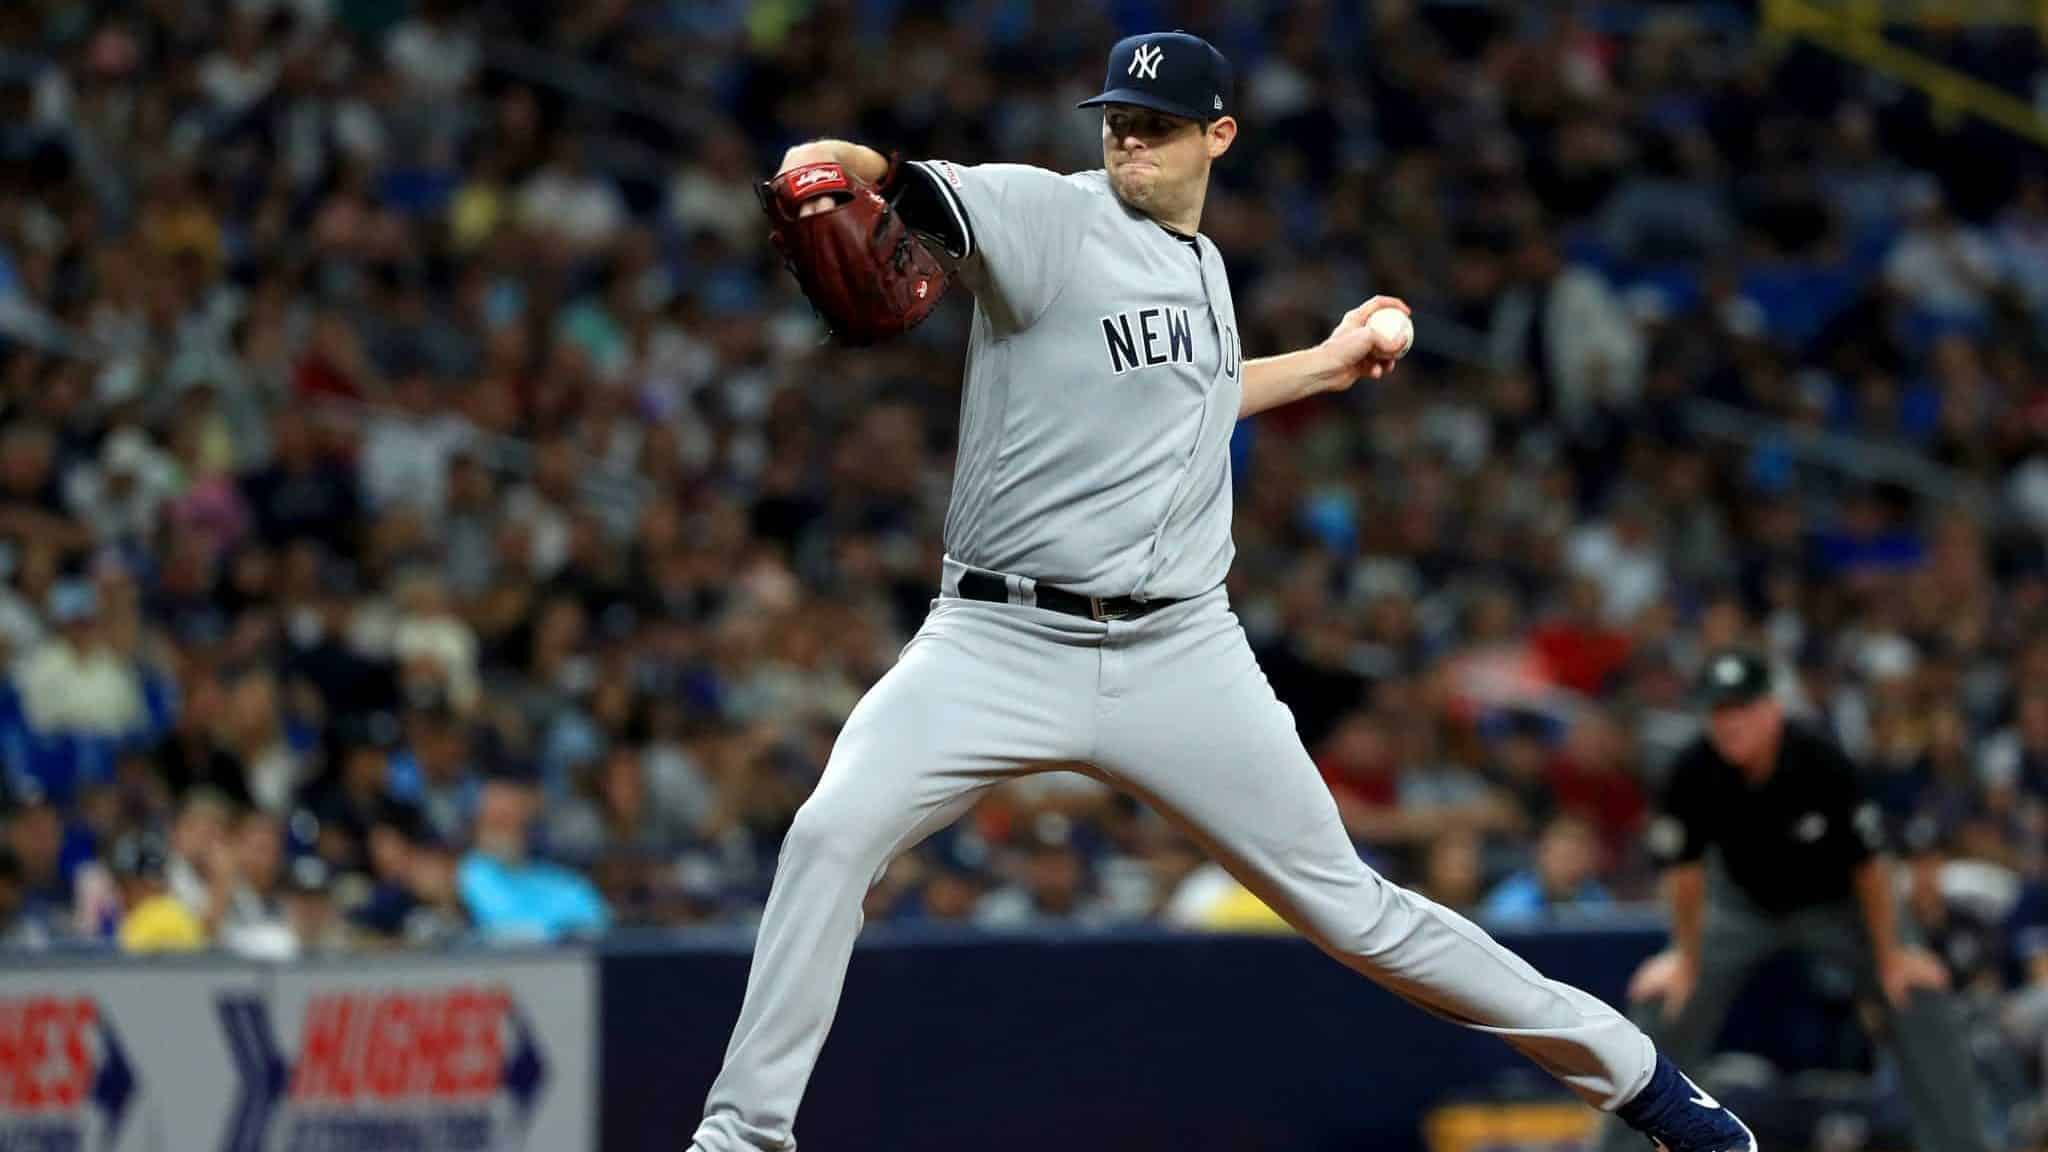 ST PETERSBURG, FLORIDA - SEPTEMBER 24: Jordan Montgomery #47 of the New York Yankees pitches during a game against the Tampa Bay Rays at Tropicana Field on September 24, 2019 in St Petersburg, Florida.